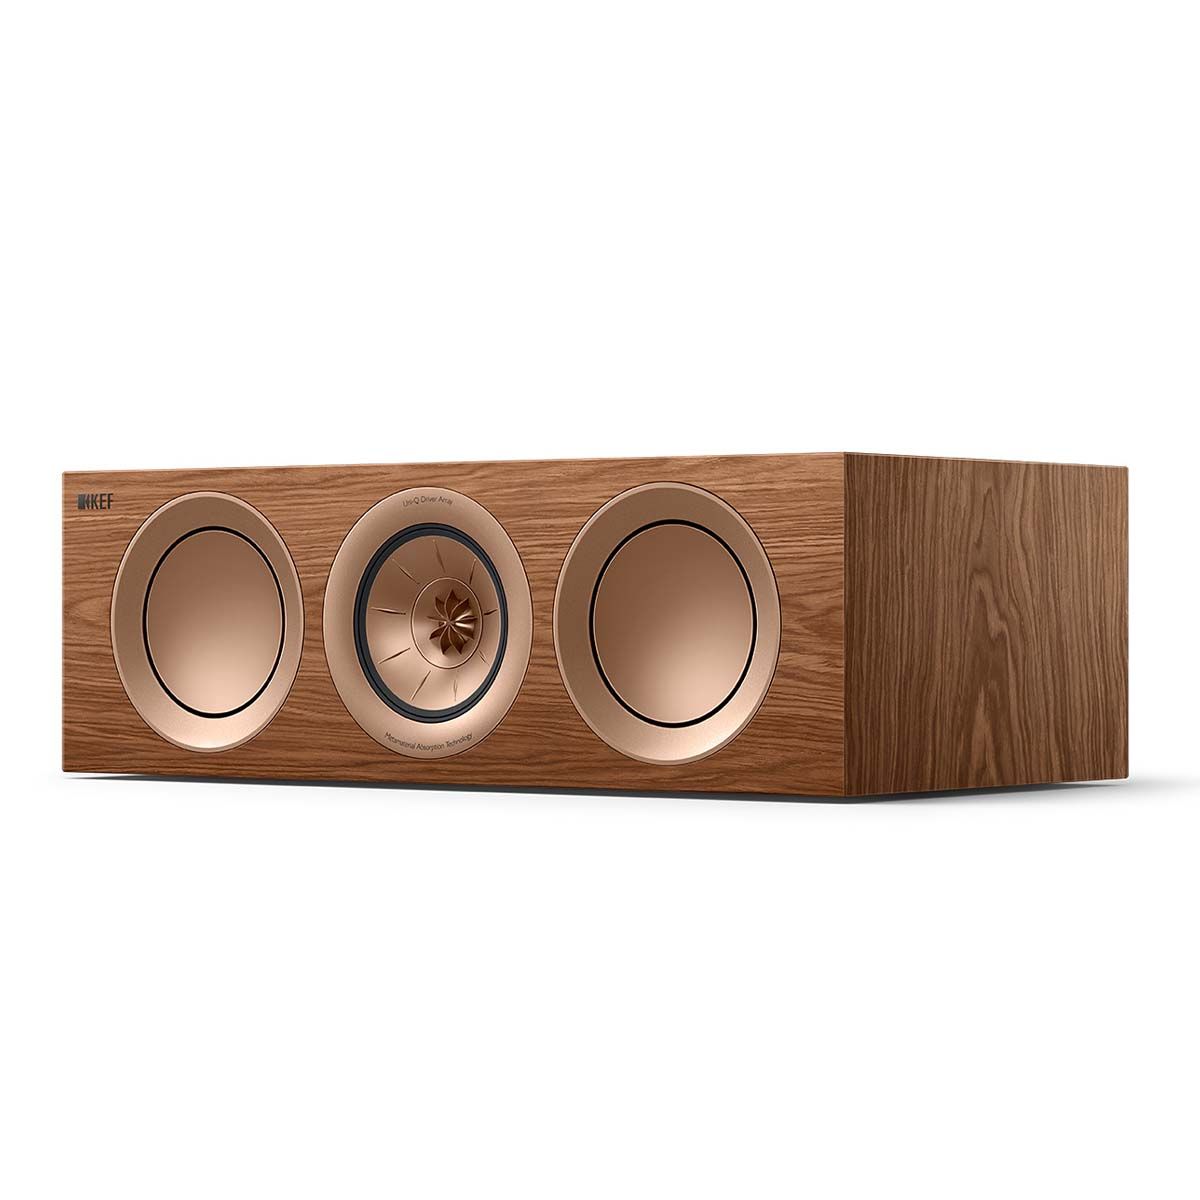 KEF R2 Meta LCR Speaker - Each walnut angled front view without grille